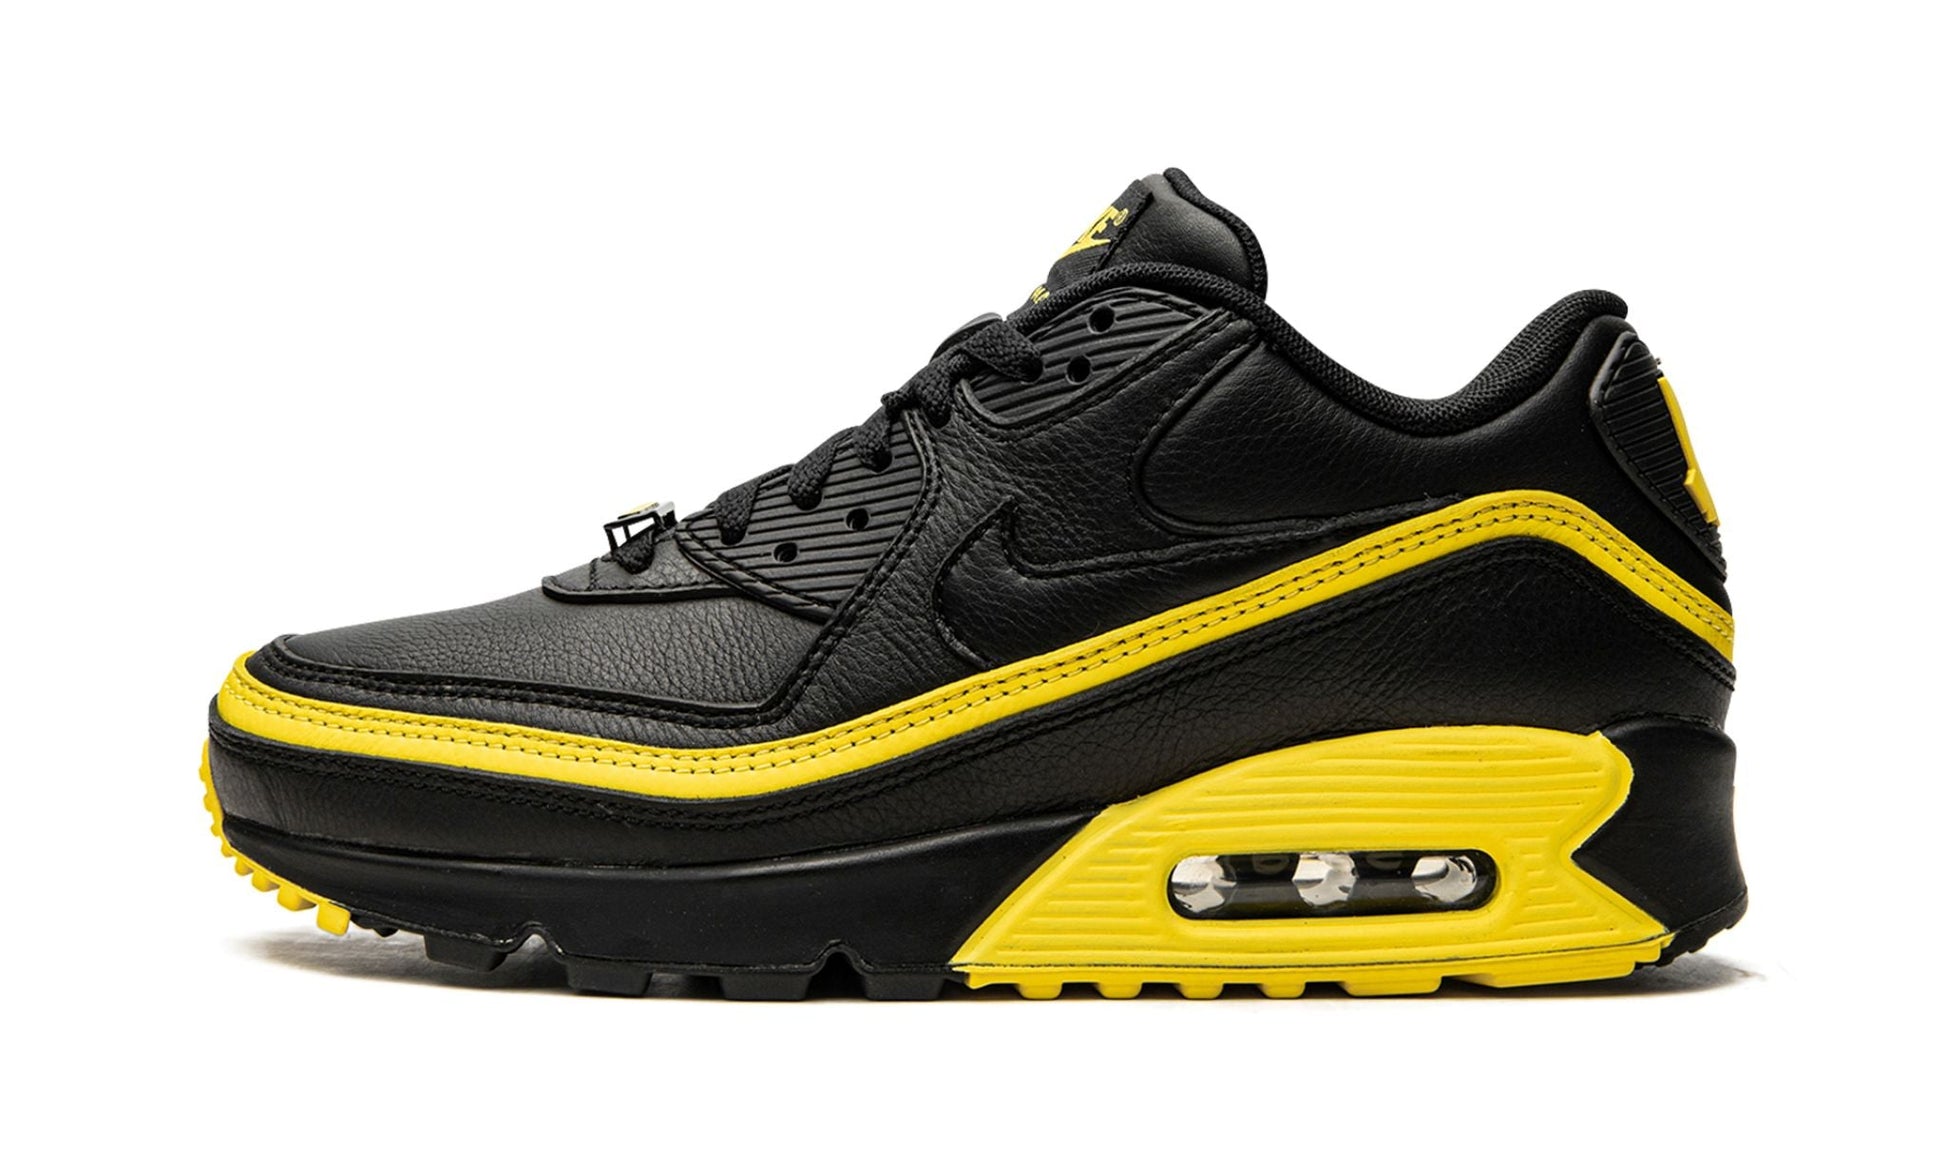 Air Max 90 / UNDFTD "Undefeated Black/Optic Yellow"